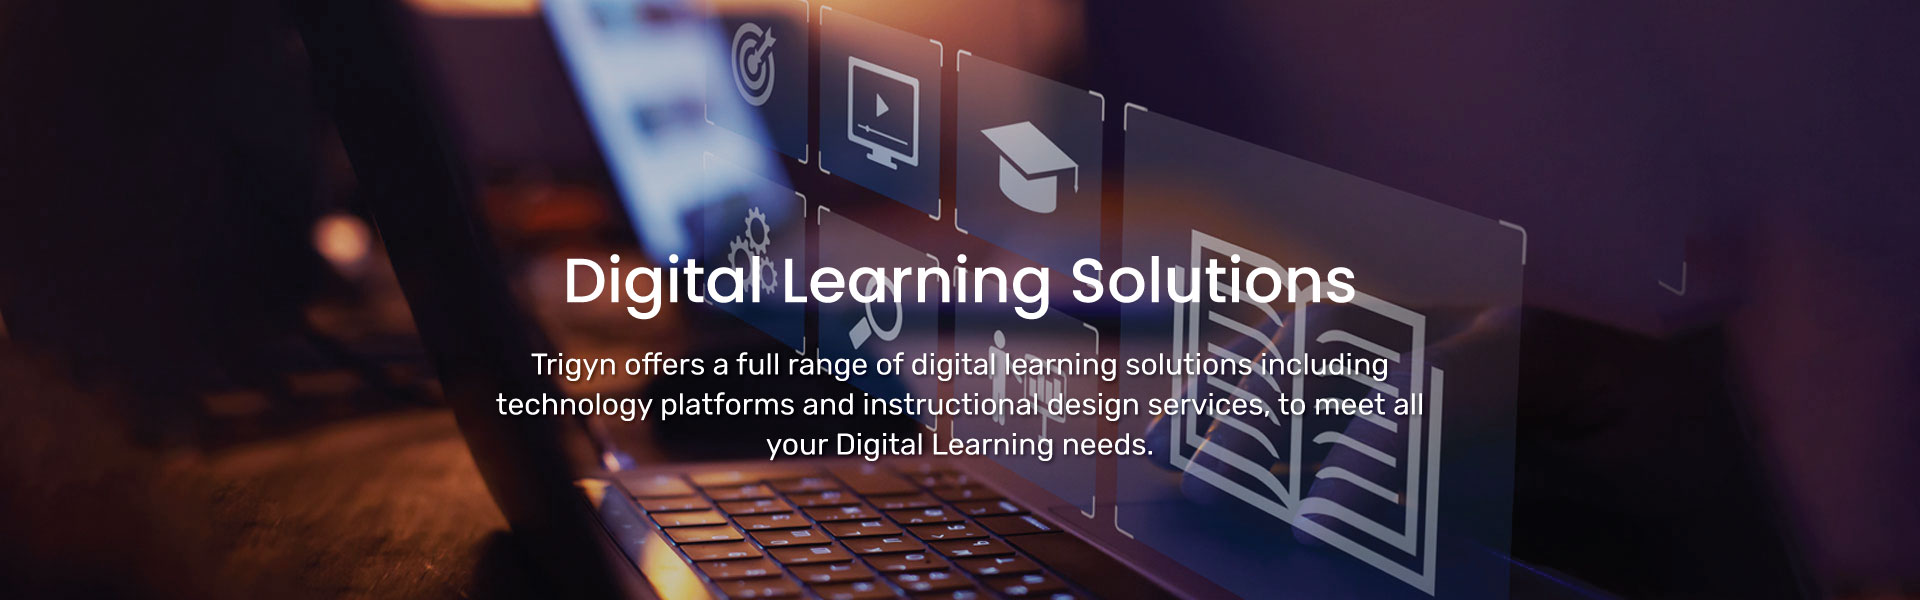 Trigyn’s Digital Learning Solutions and Services